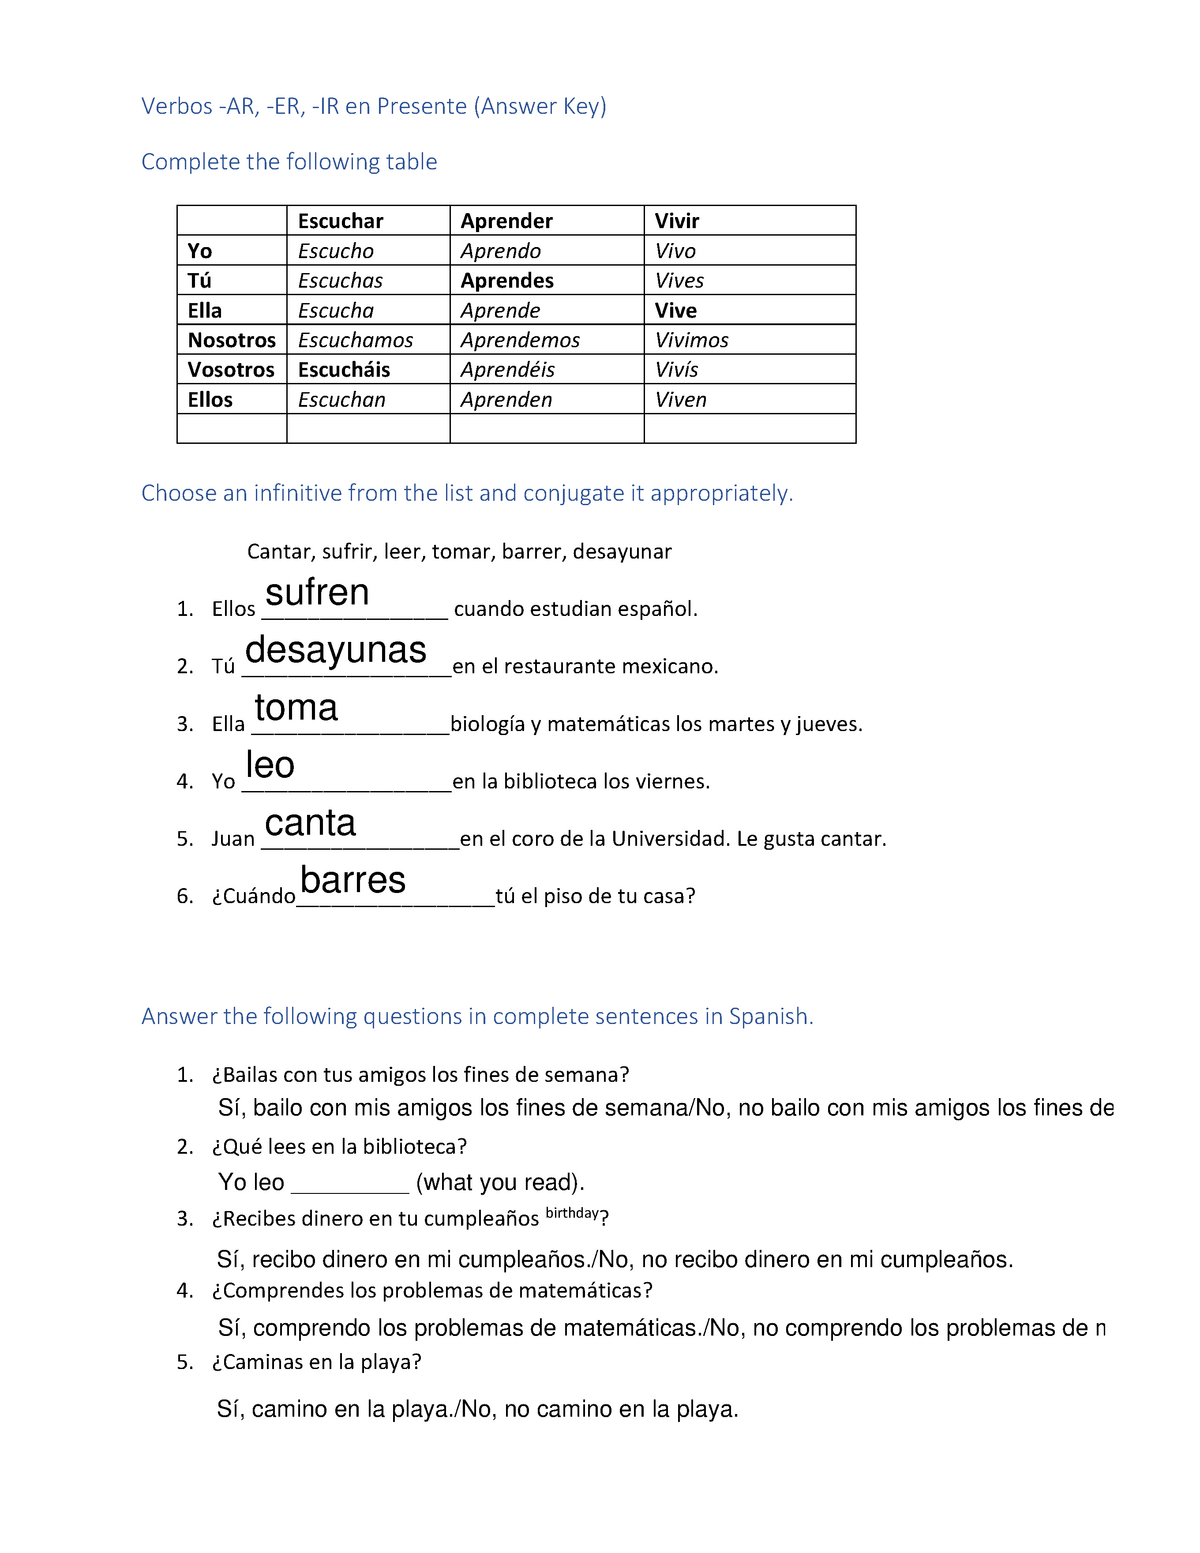 gram-tica-verbos-ar-er-ir-in-present-answer-key-complete-the